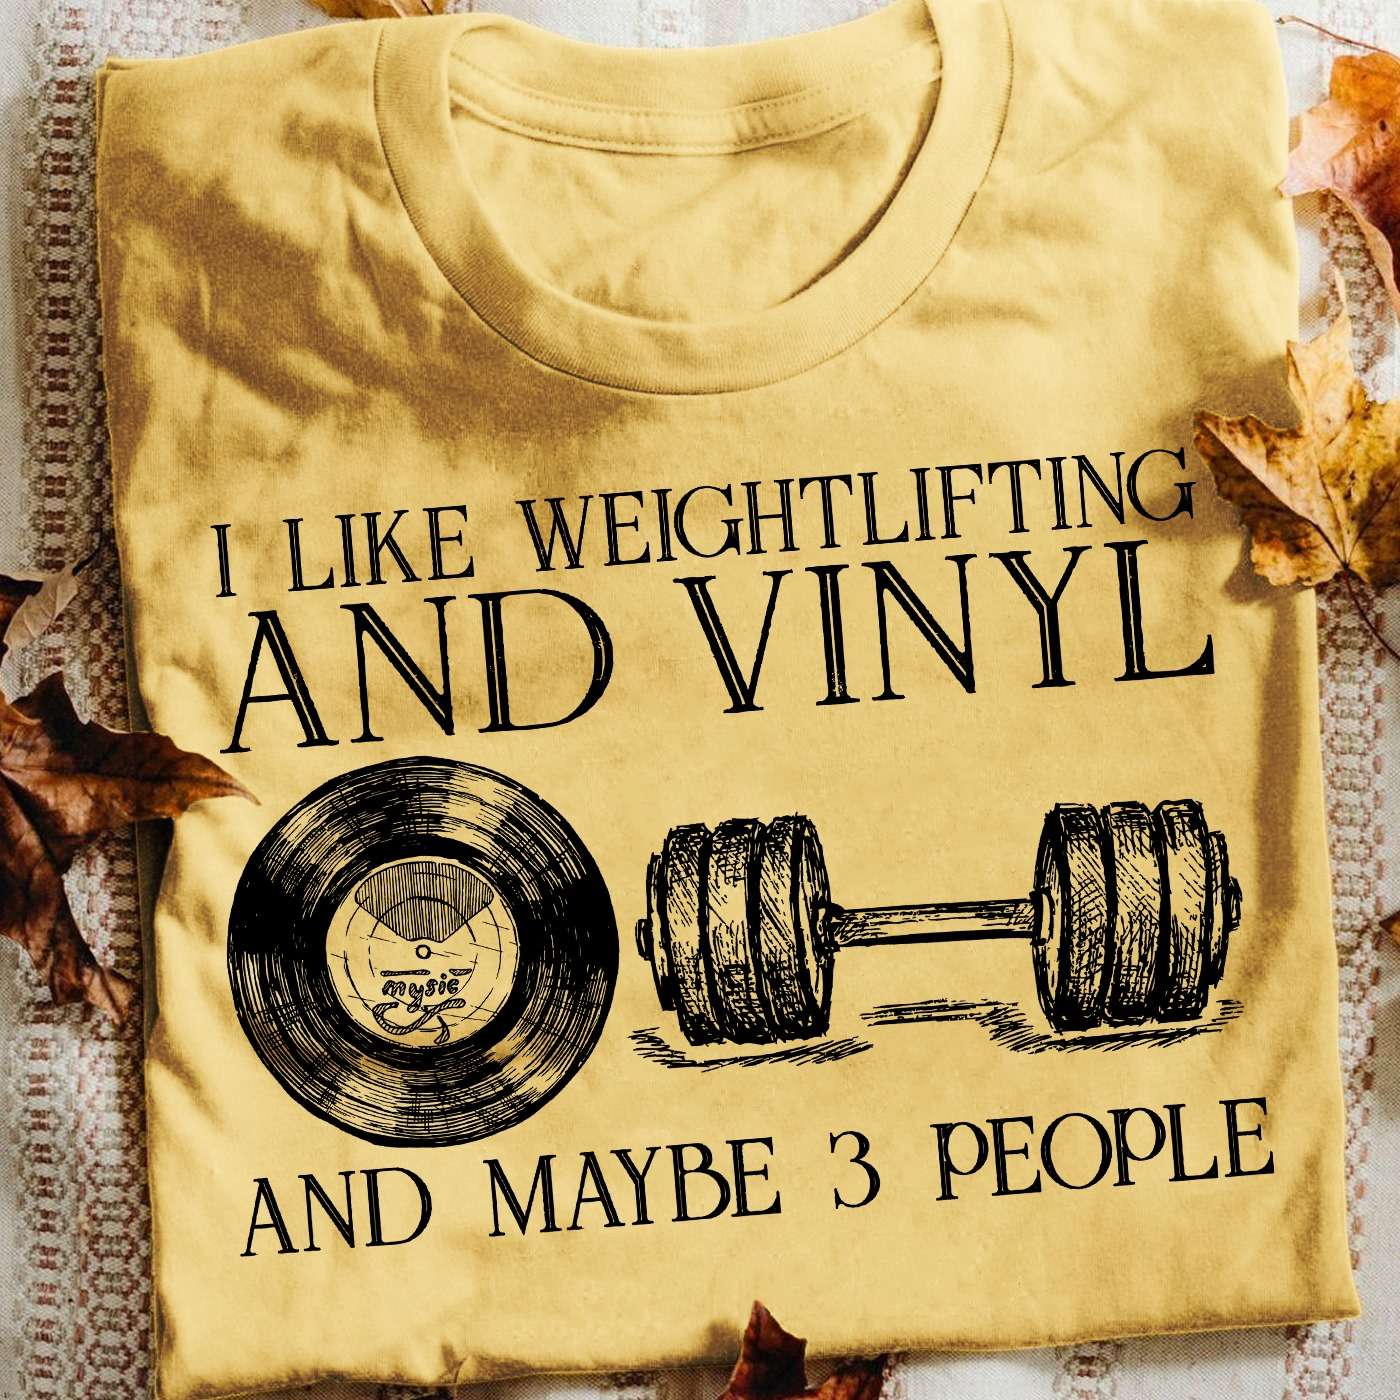 I like weightlifting and vinyl and maybe 3 people - Vinyl records lover